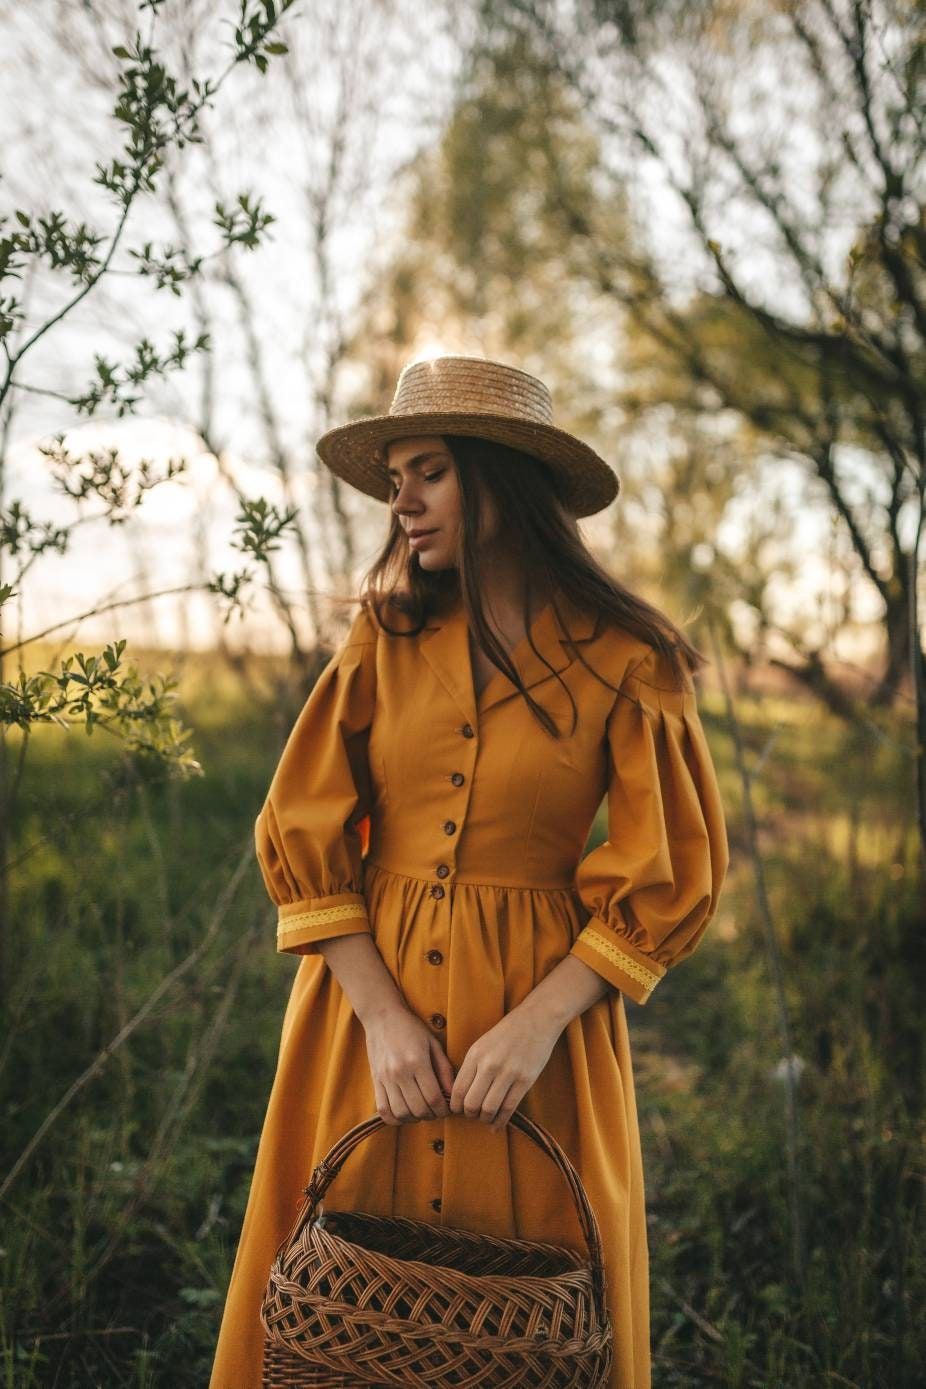 How to Wear Mustard Maxi Dress: 13 Cheerful & Stylish Outfit Ideas